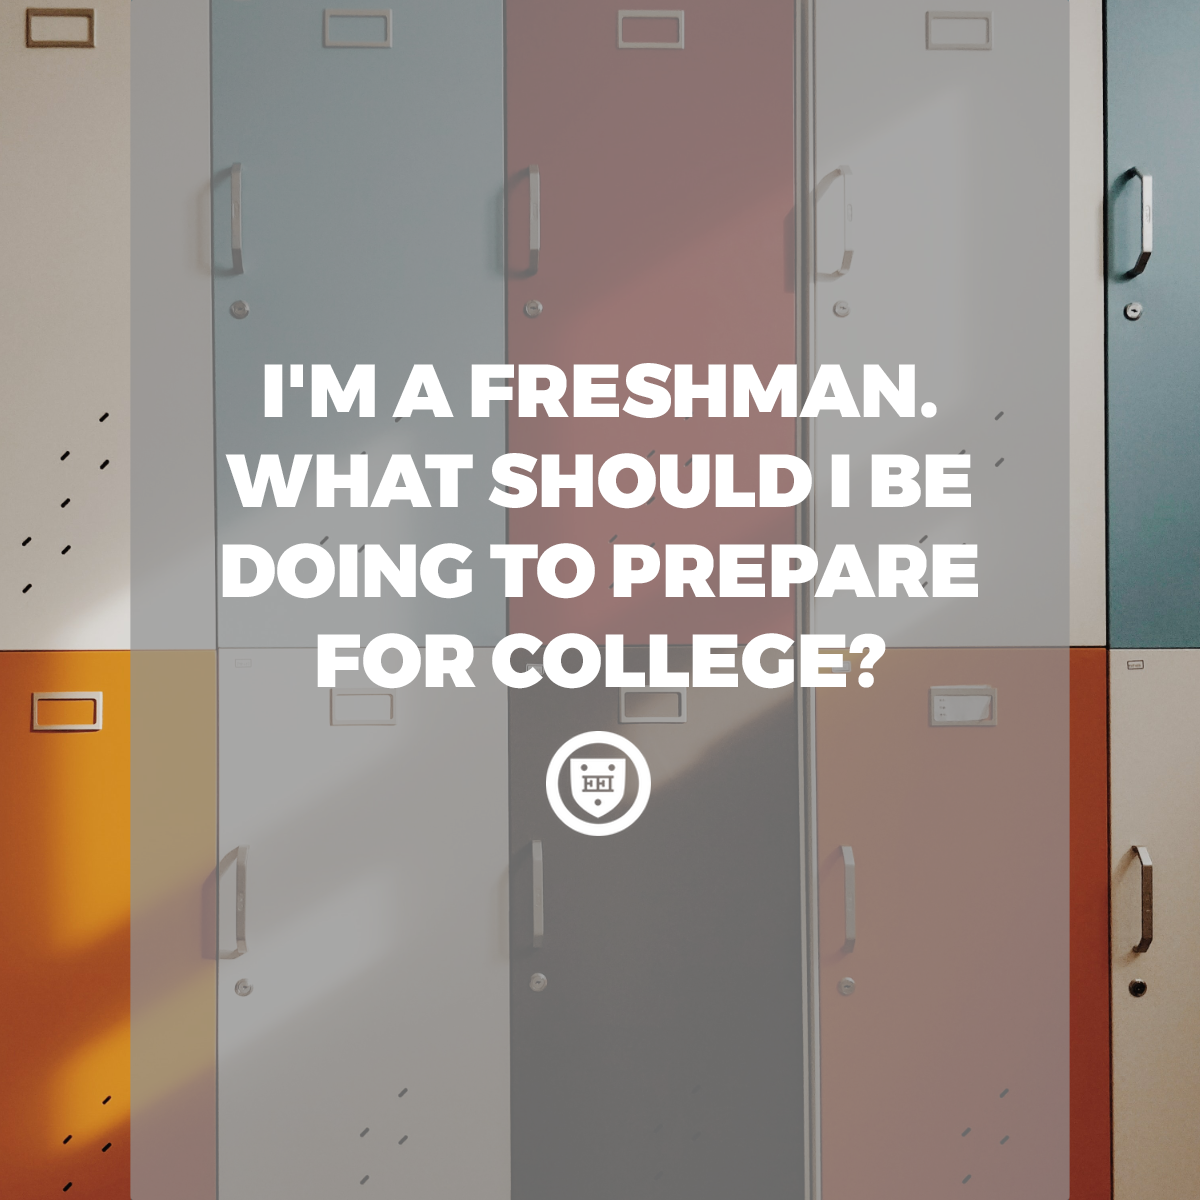 I'm a Freshman. What should I be doing to prepare for college? - Elite Educational Institute